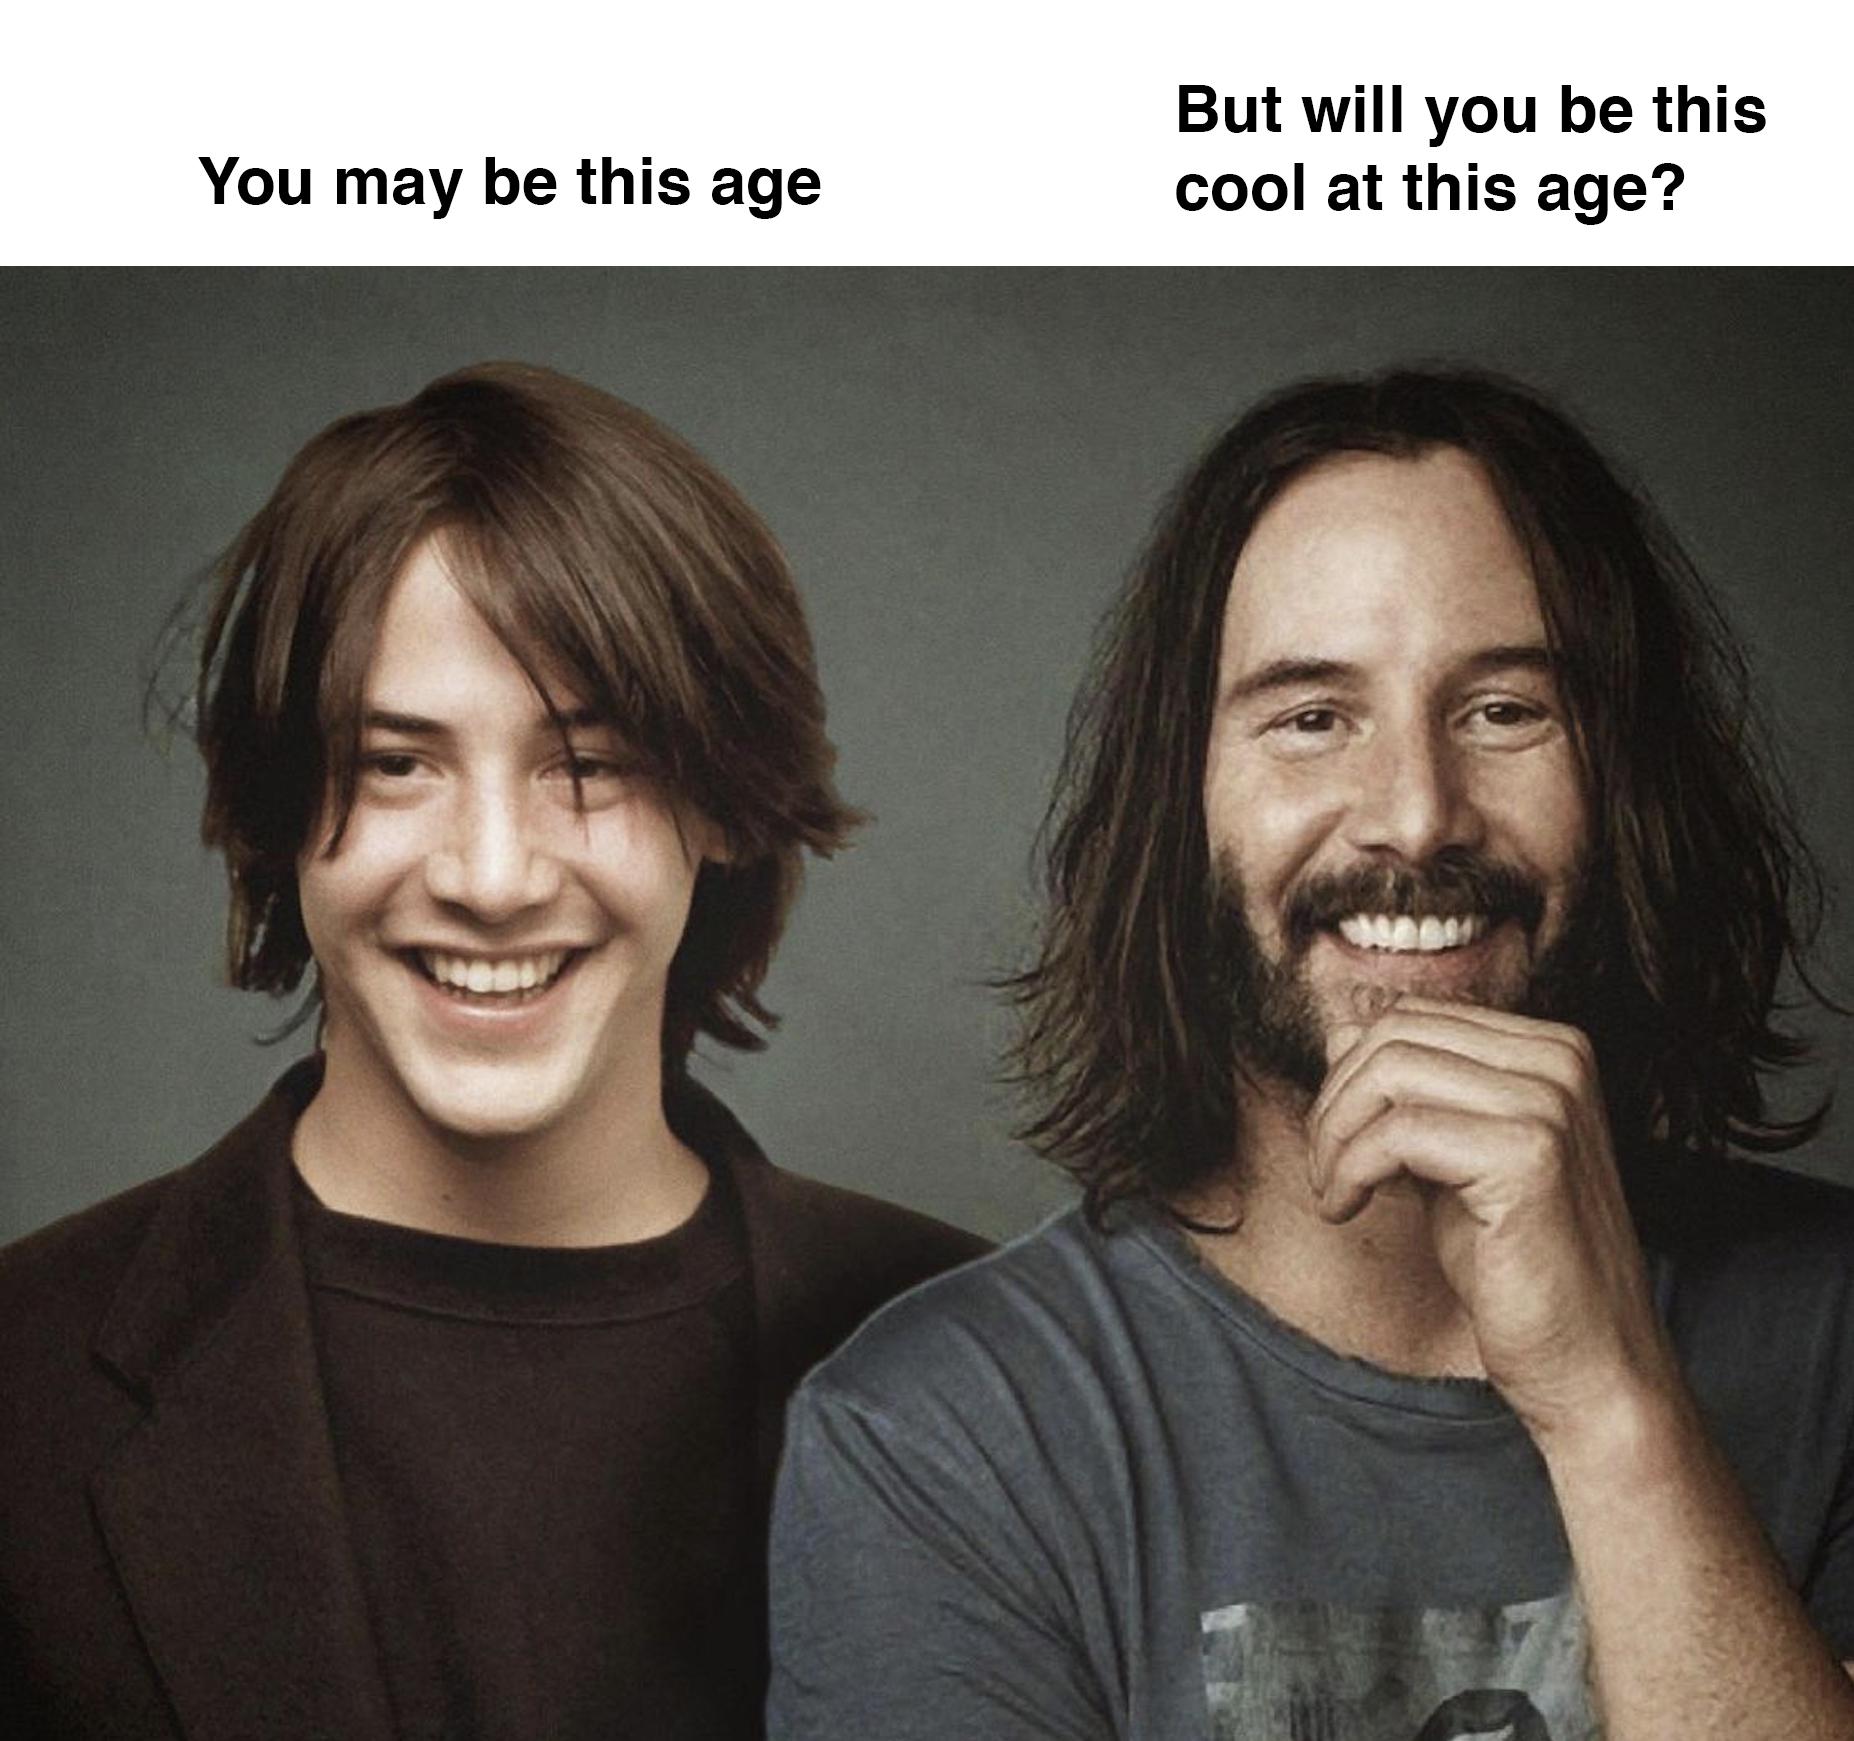 keanu reeves then and now - You may be this age But will you be this cool at this age?